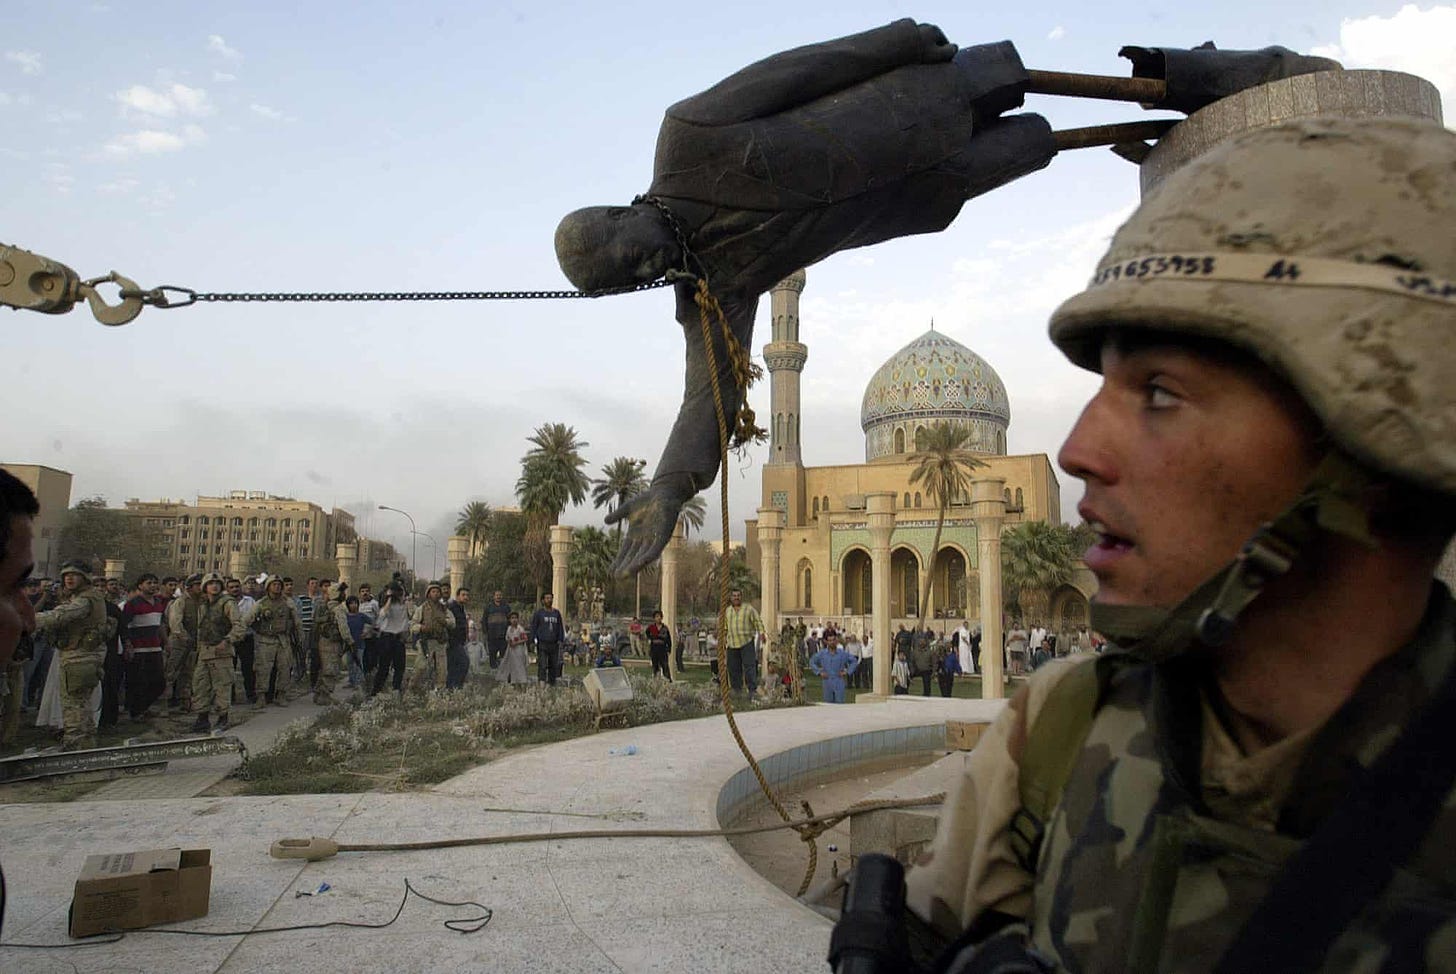 9 April 2003 Three weeks into the US-led invasion of Iraq, American soldiers and Iraqi civilians pull down a statue of Saddam Hussein in downtown Baghdad. Photograph: Jérôme Delay/AP